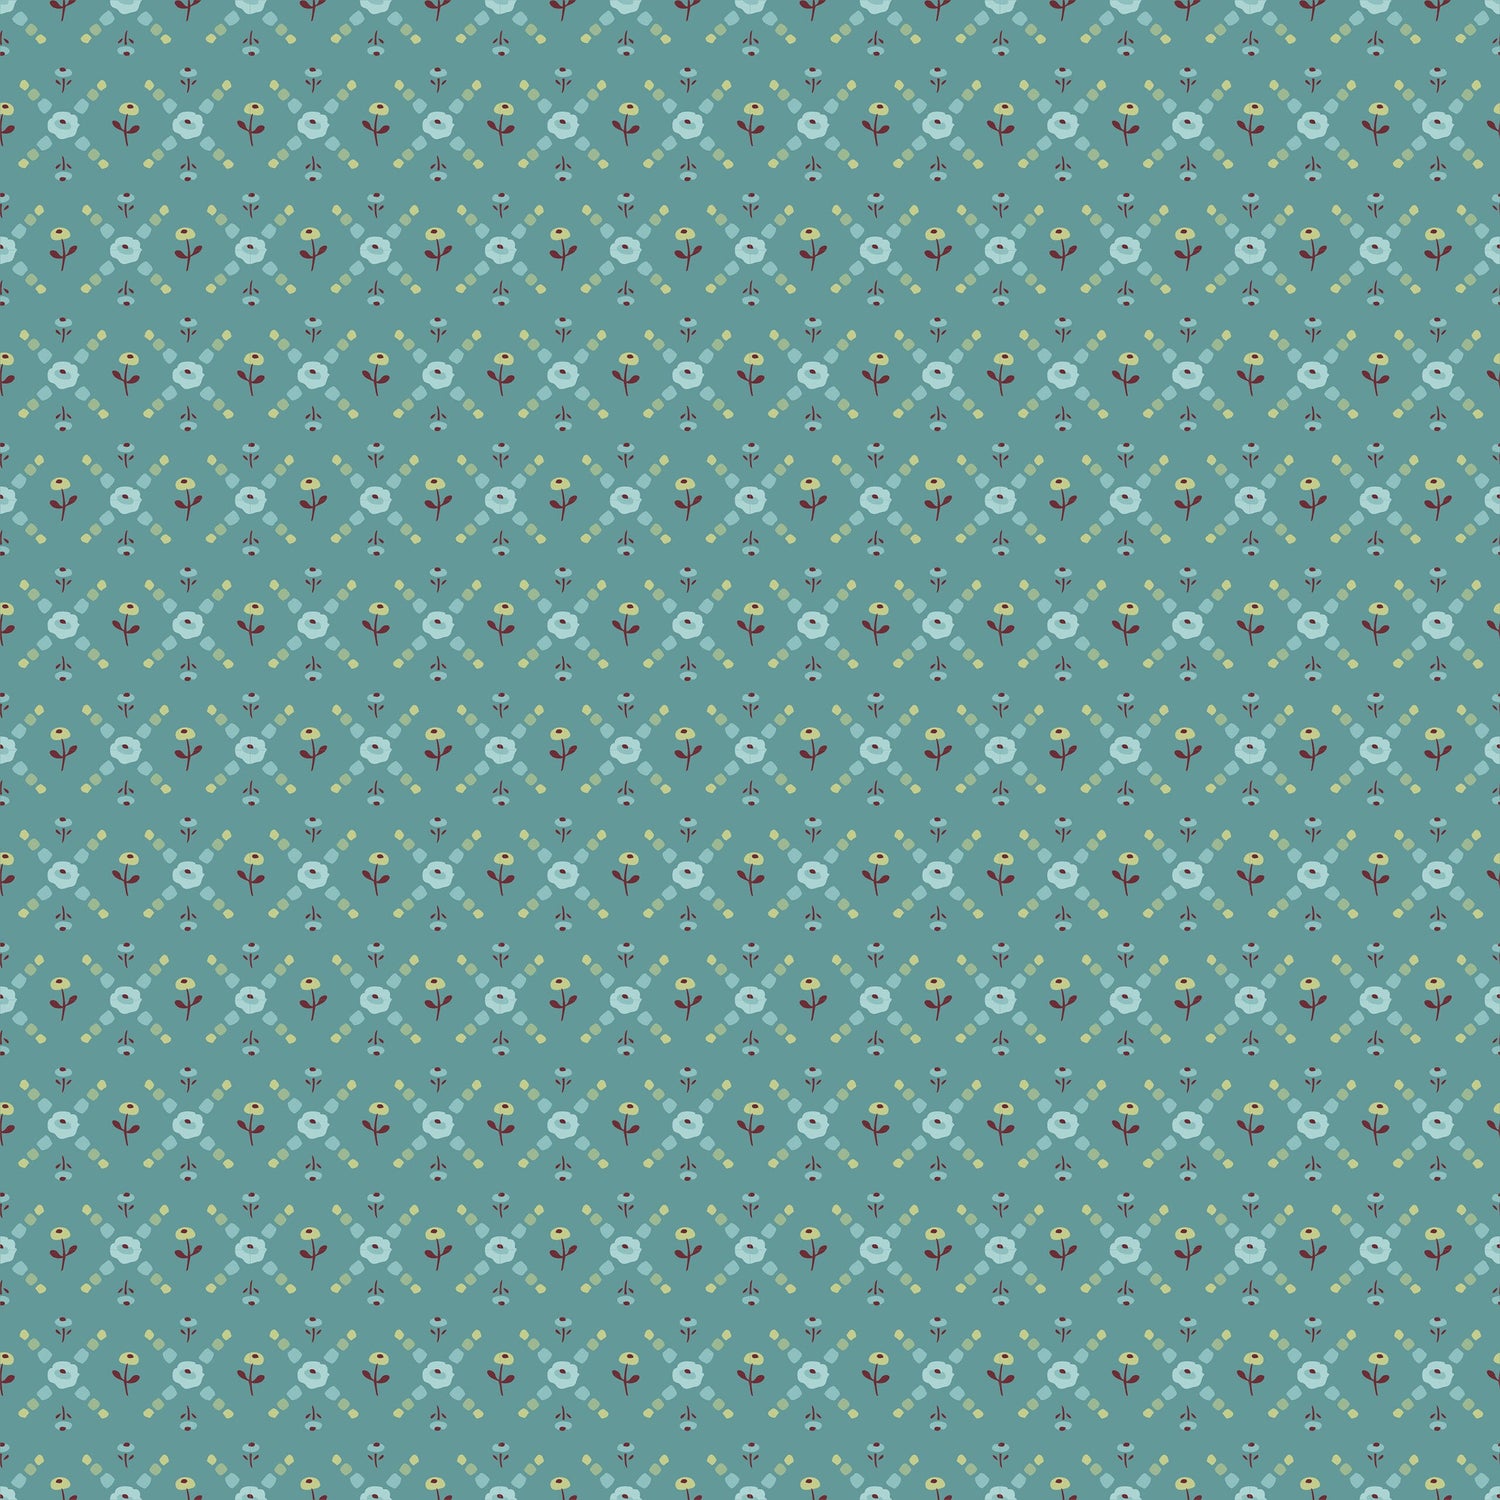 Hollyhock Lane Joy Teal by Sheri McCulley for Poppie Cotton - HL23804